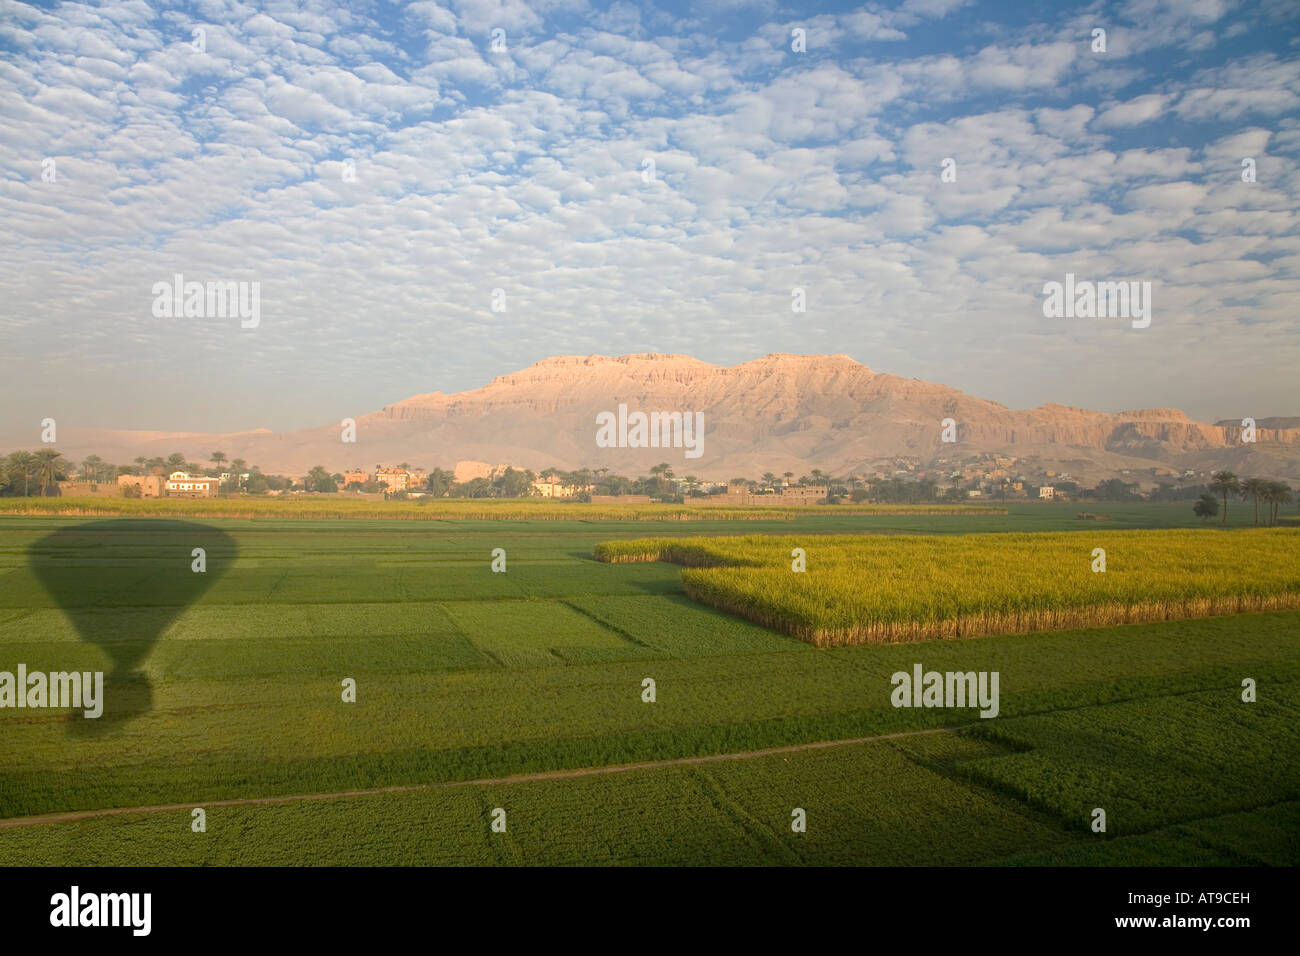 Aerial view of Luxor West Bank Theban Mountains Valley of Kings taken from hot air balloon at dawn sunrise Egypt North Africa Stock Photo